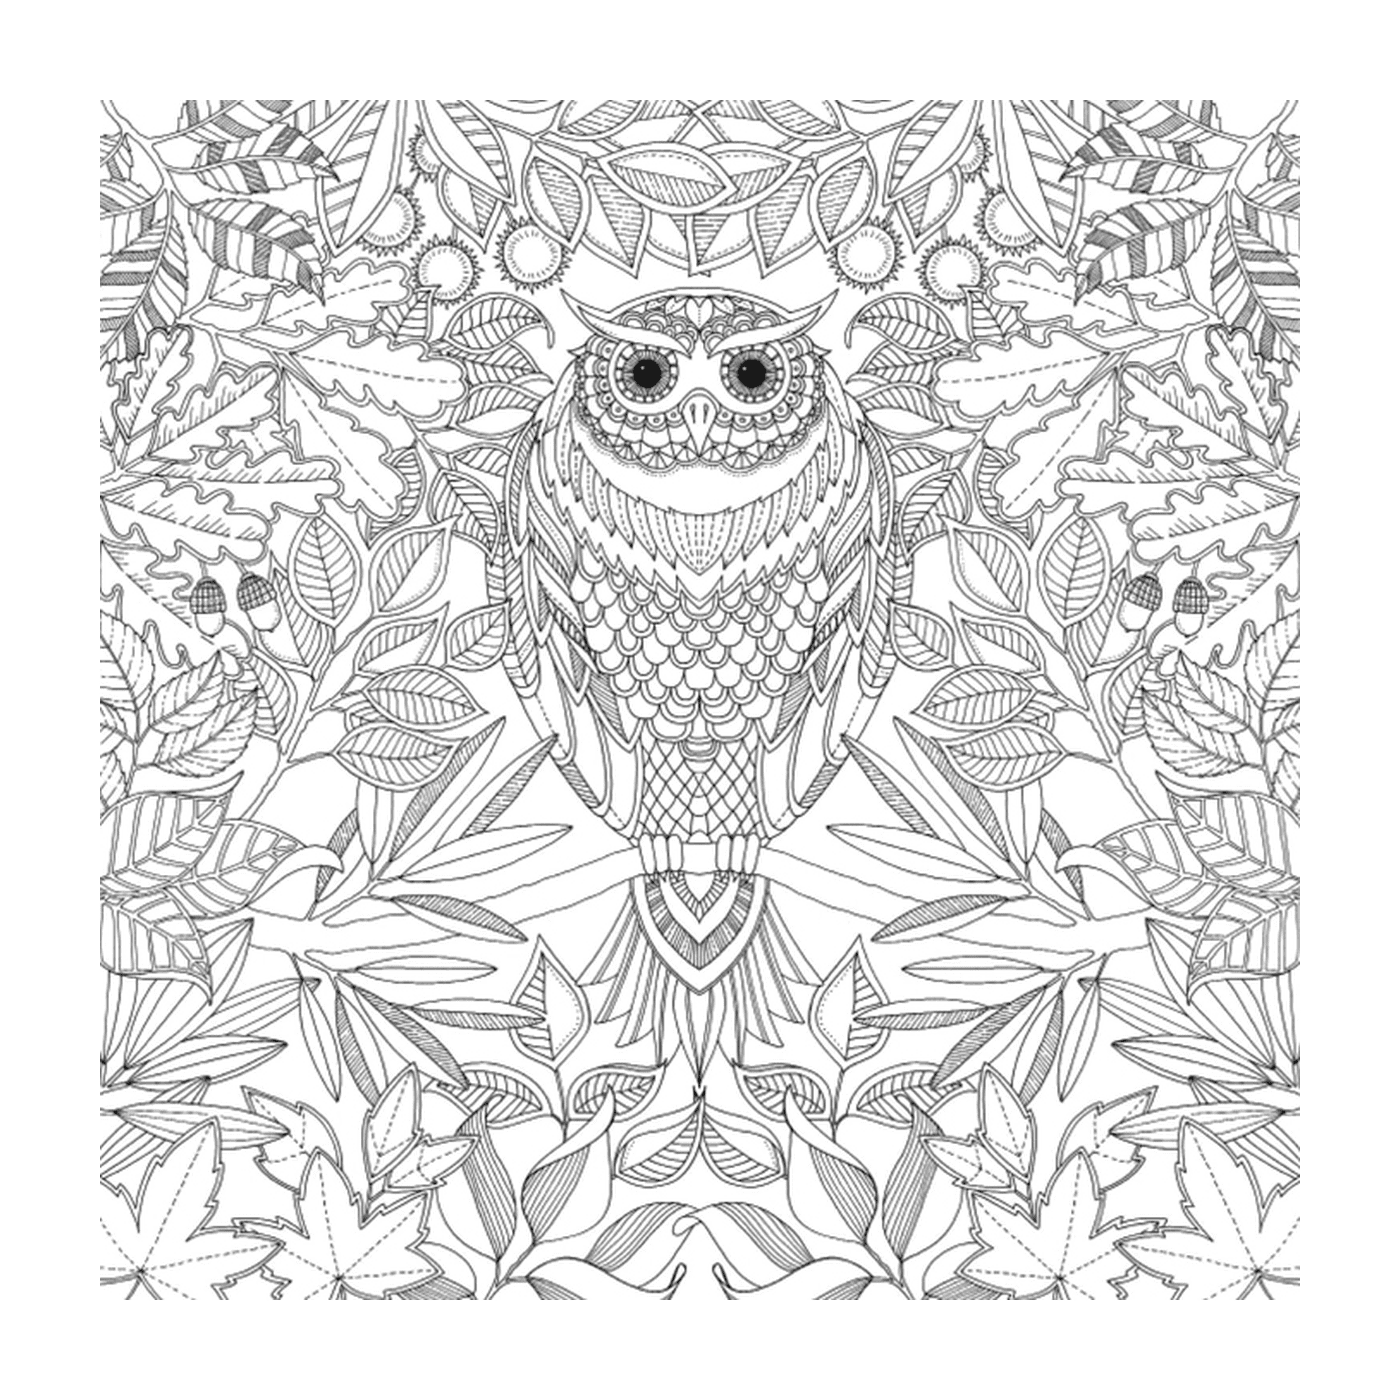  Owl surrounded by leaves 